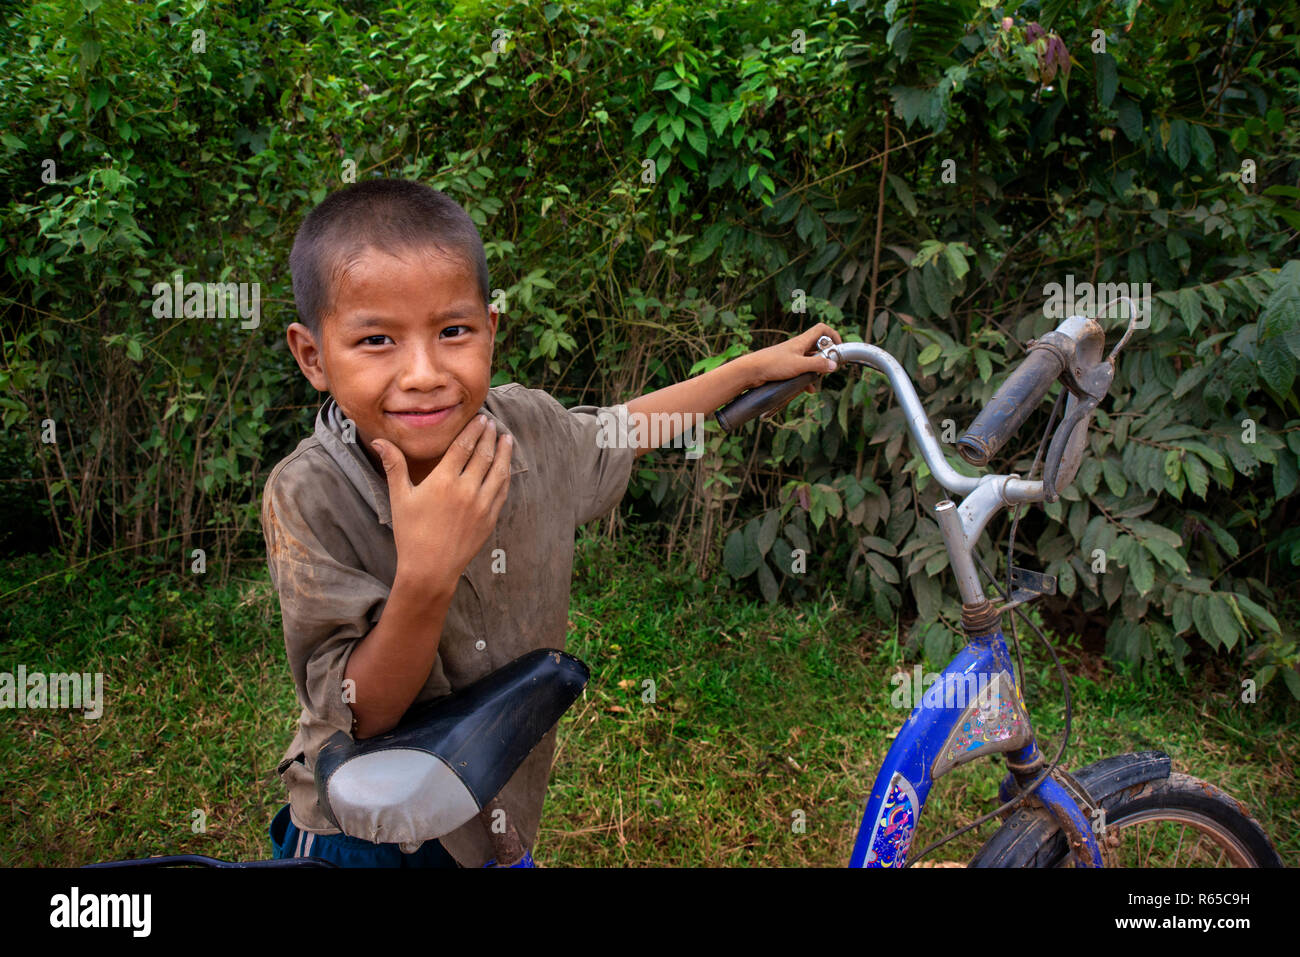 Young local boy with a bicycle in Vang Vieng village, Laos Stock Photo